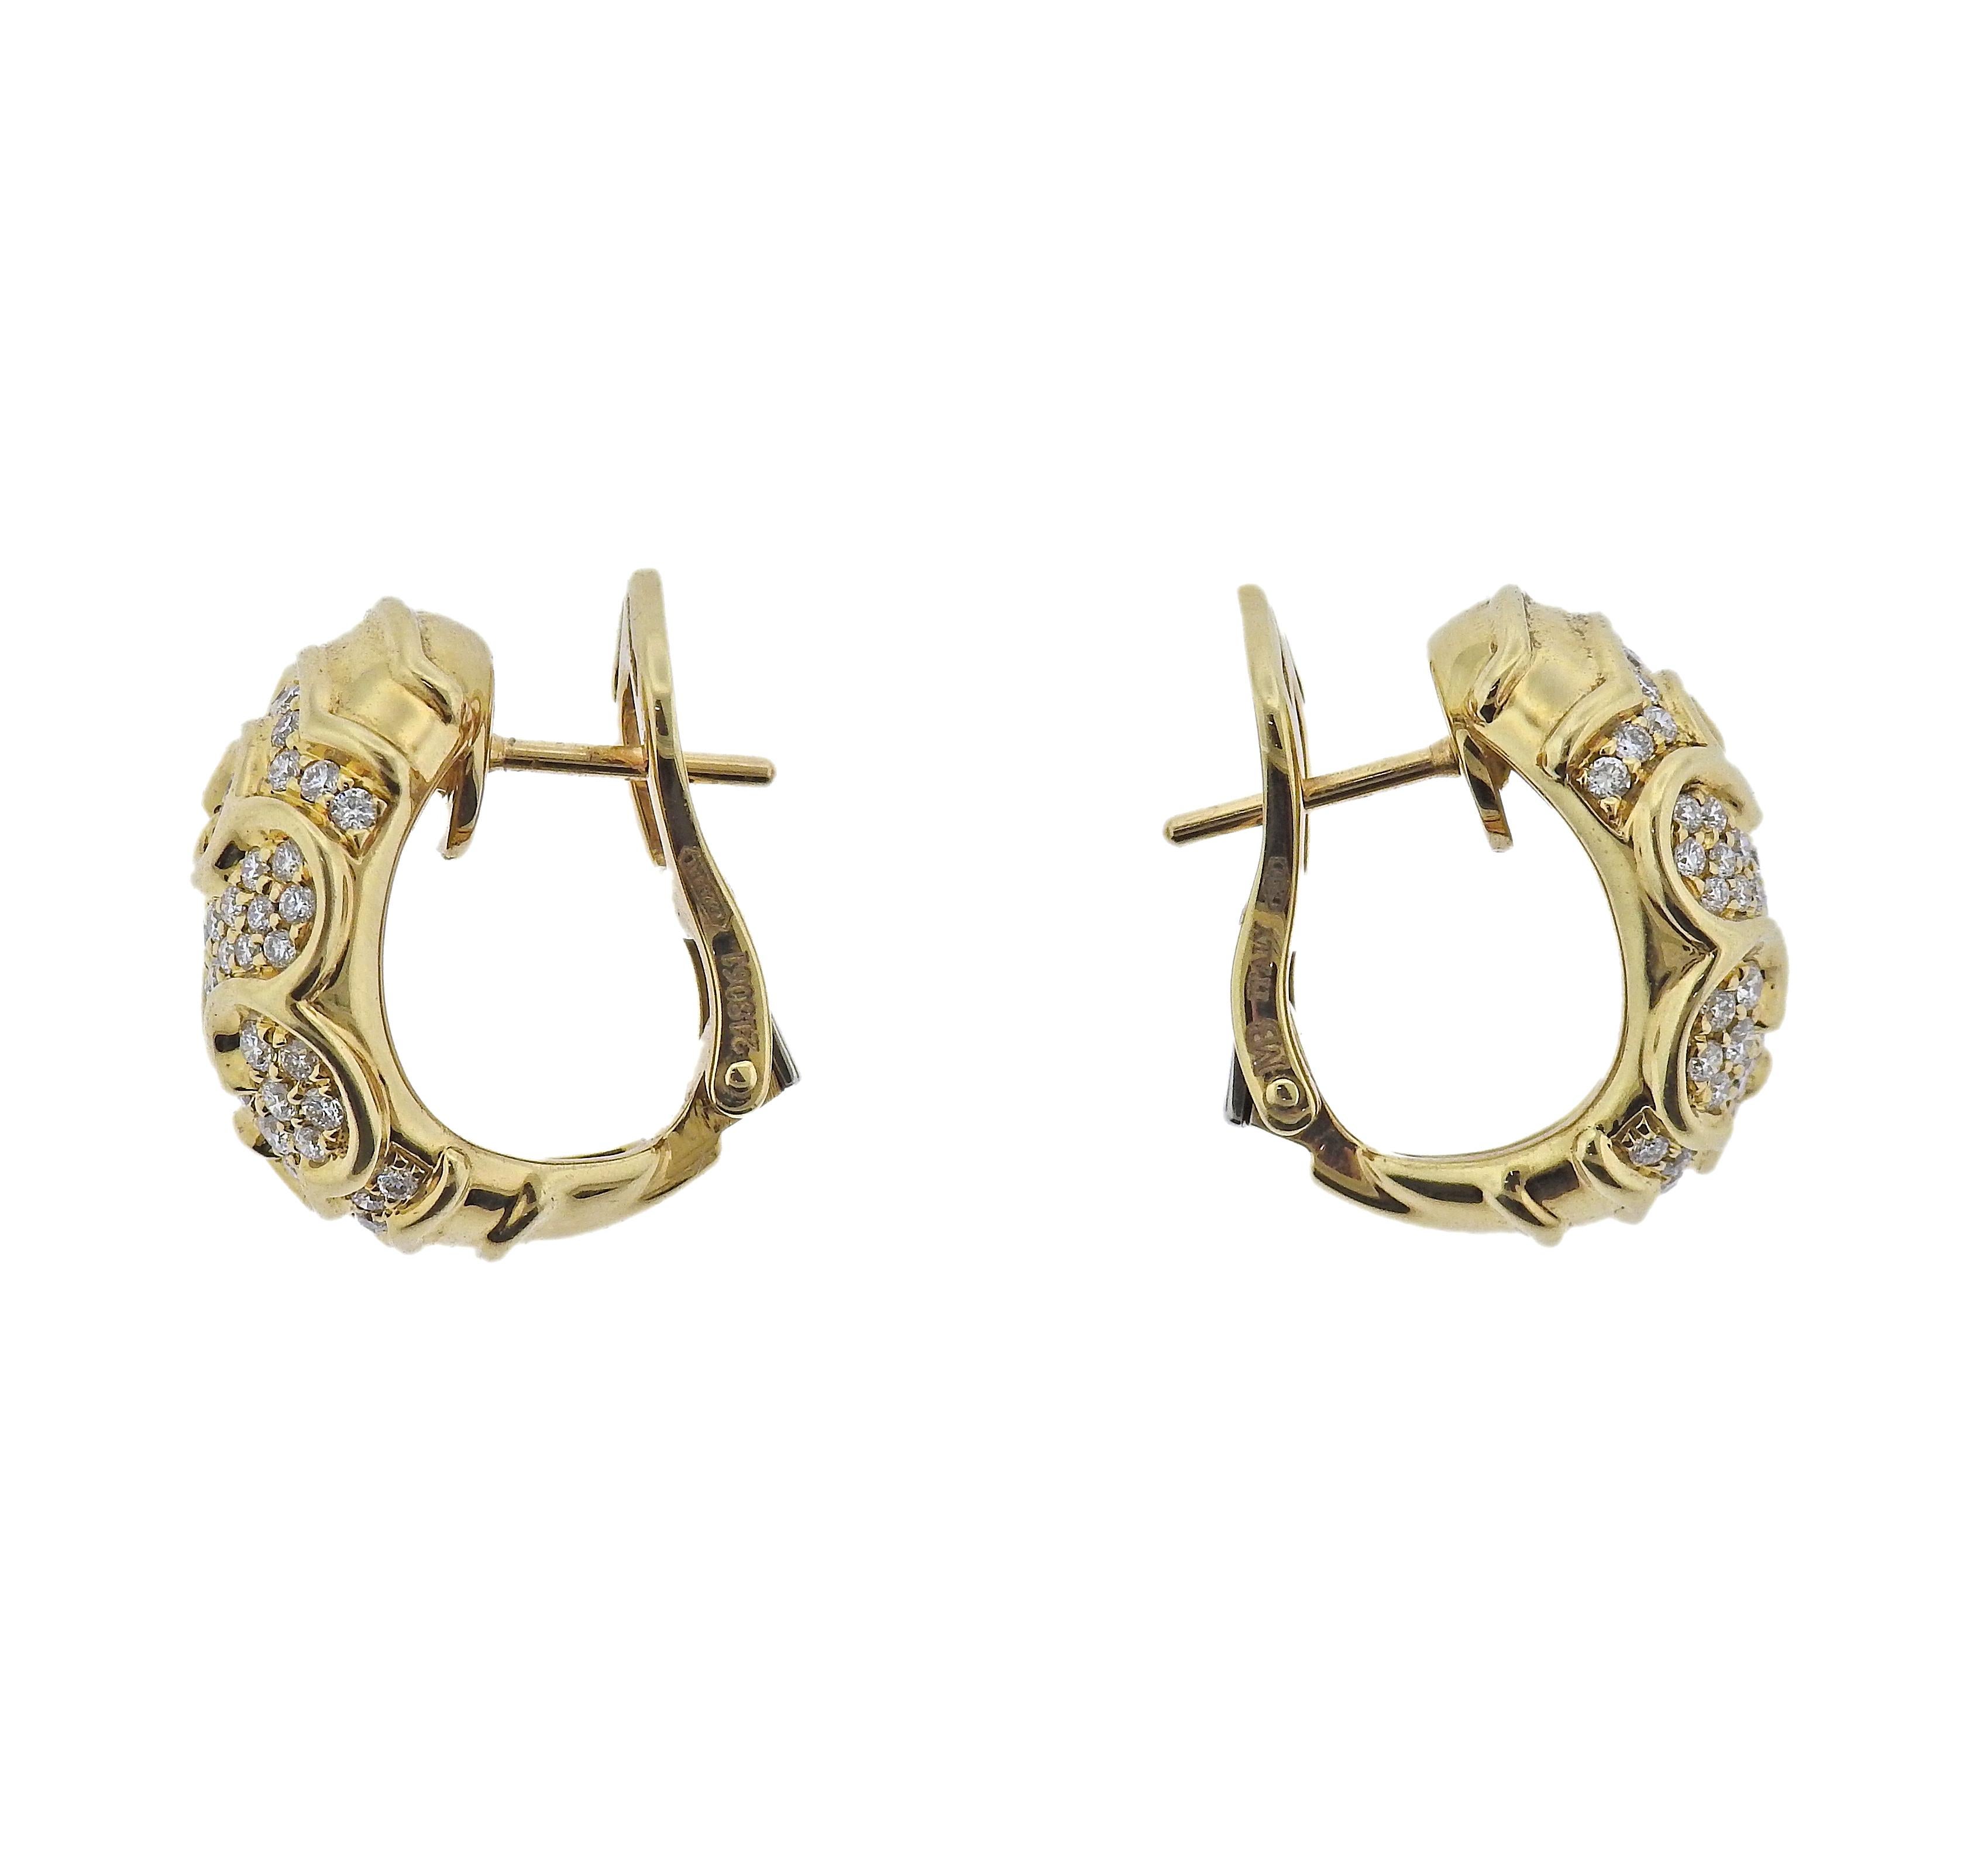 Pair of 18k gold hoop earrings by Marina B, with approx. 1.00ctw in G/VS diamonds. Earrings measure 19mm x 13mm. Marked: Marina B, 750, MB, Italy, 218061. Weight - 12.2 grams.